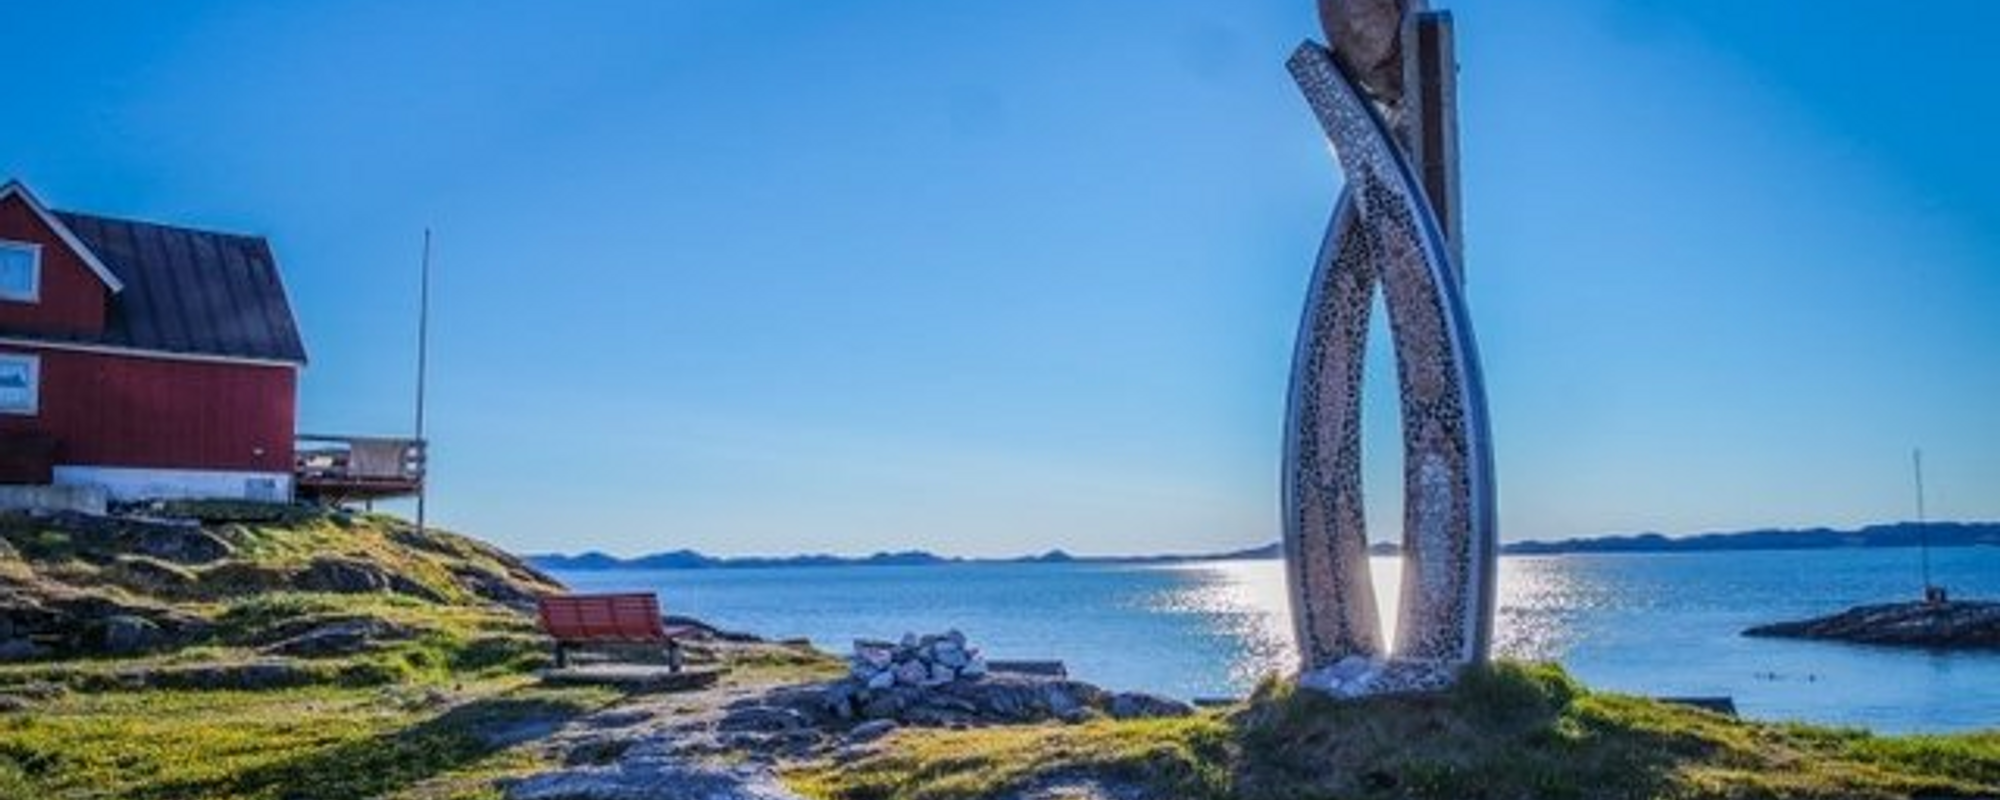 [Greenland Nuuk #16] Let's walk the trail of Nuuk, Greenland's beautiful city of nature!